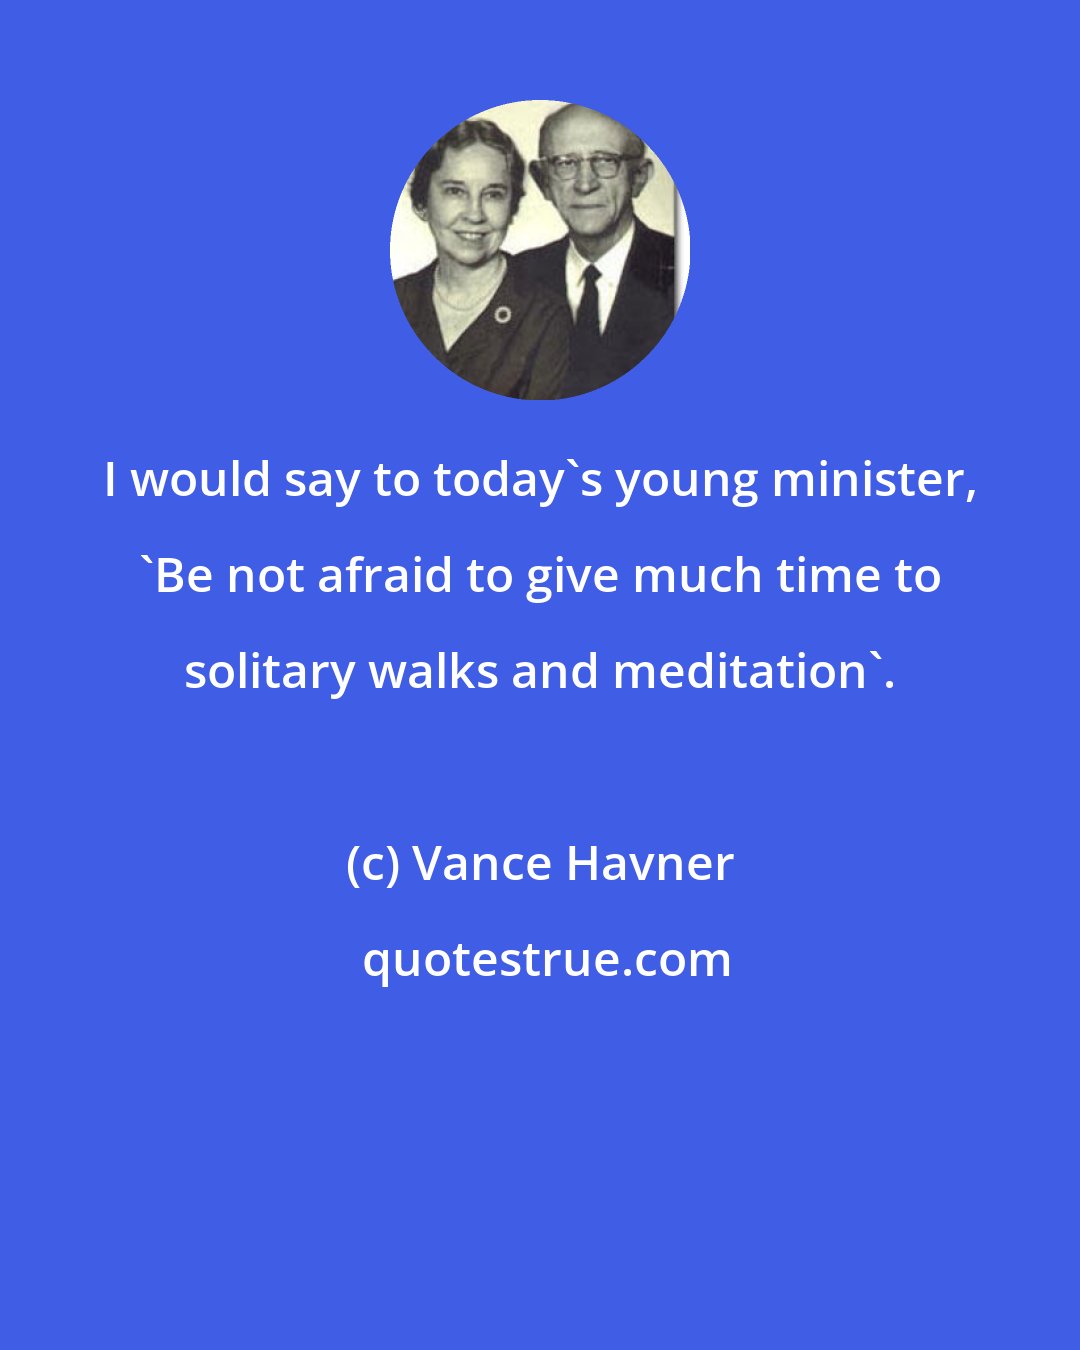 Vance Havner: I would say to today's young minister, 'Be not afraid to give much time to solitary walks and meditation'.